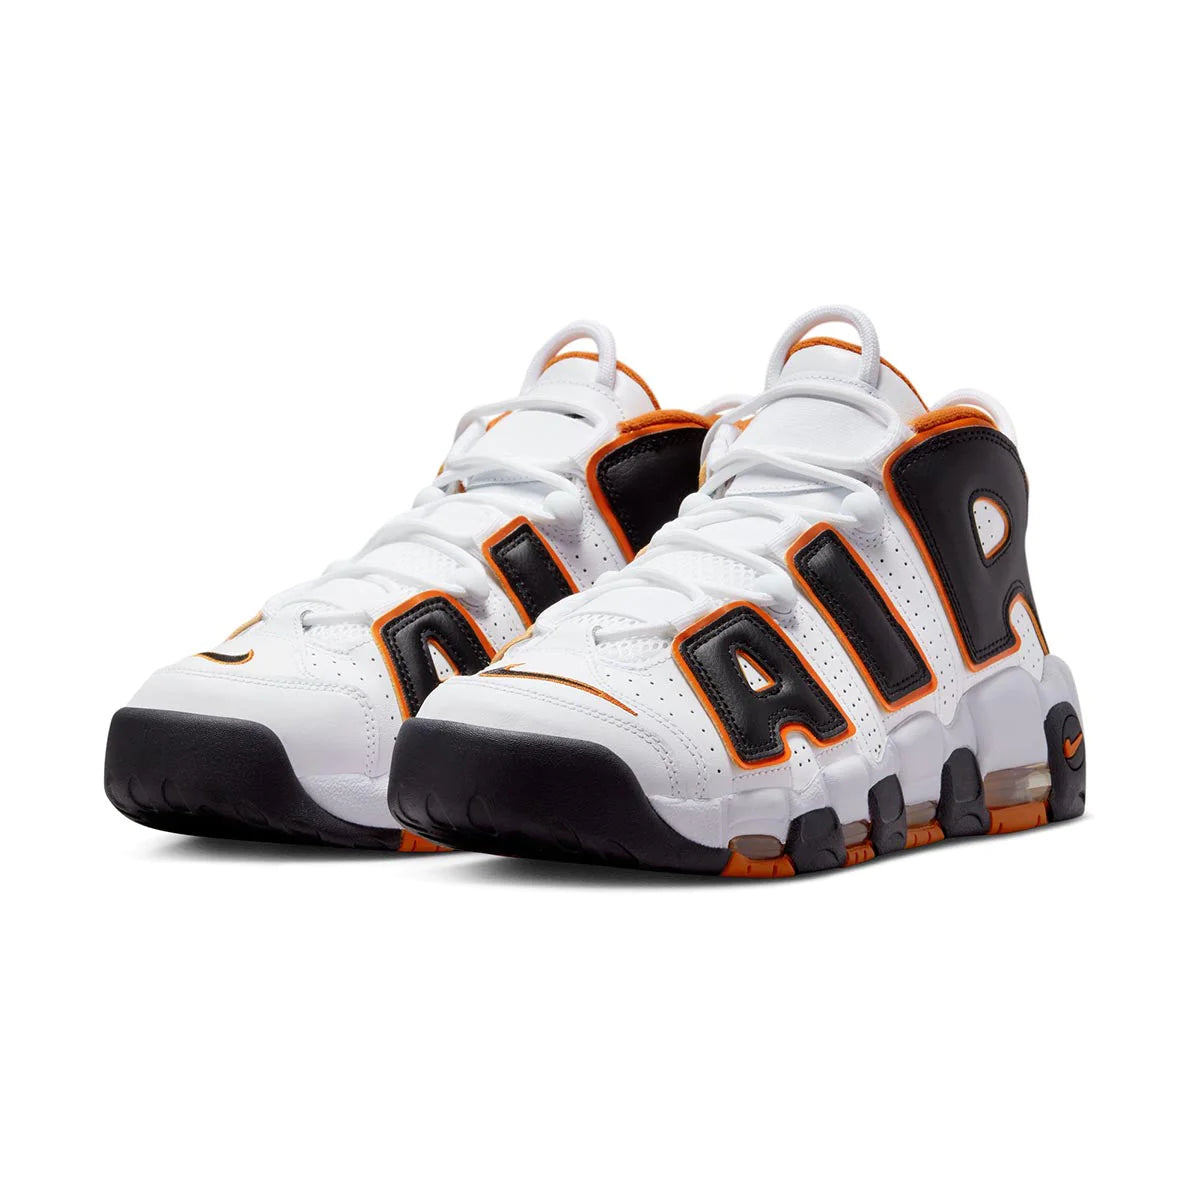 Nike Air Uptempo - A Classic Sneaker That Never Goes Out of Style